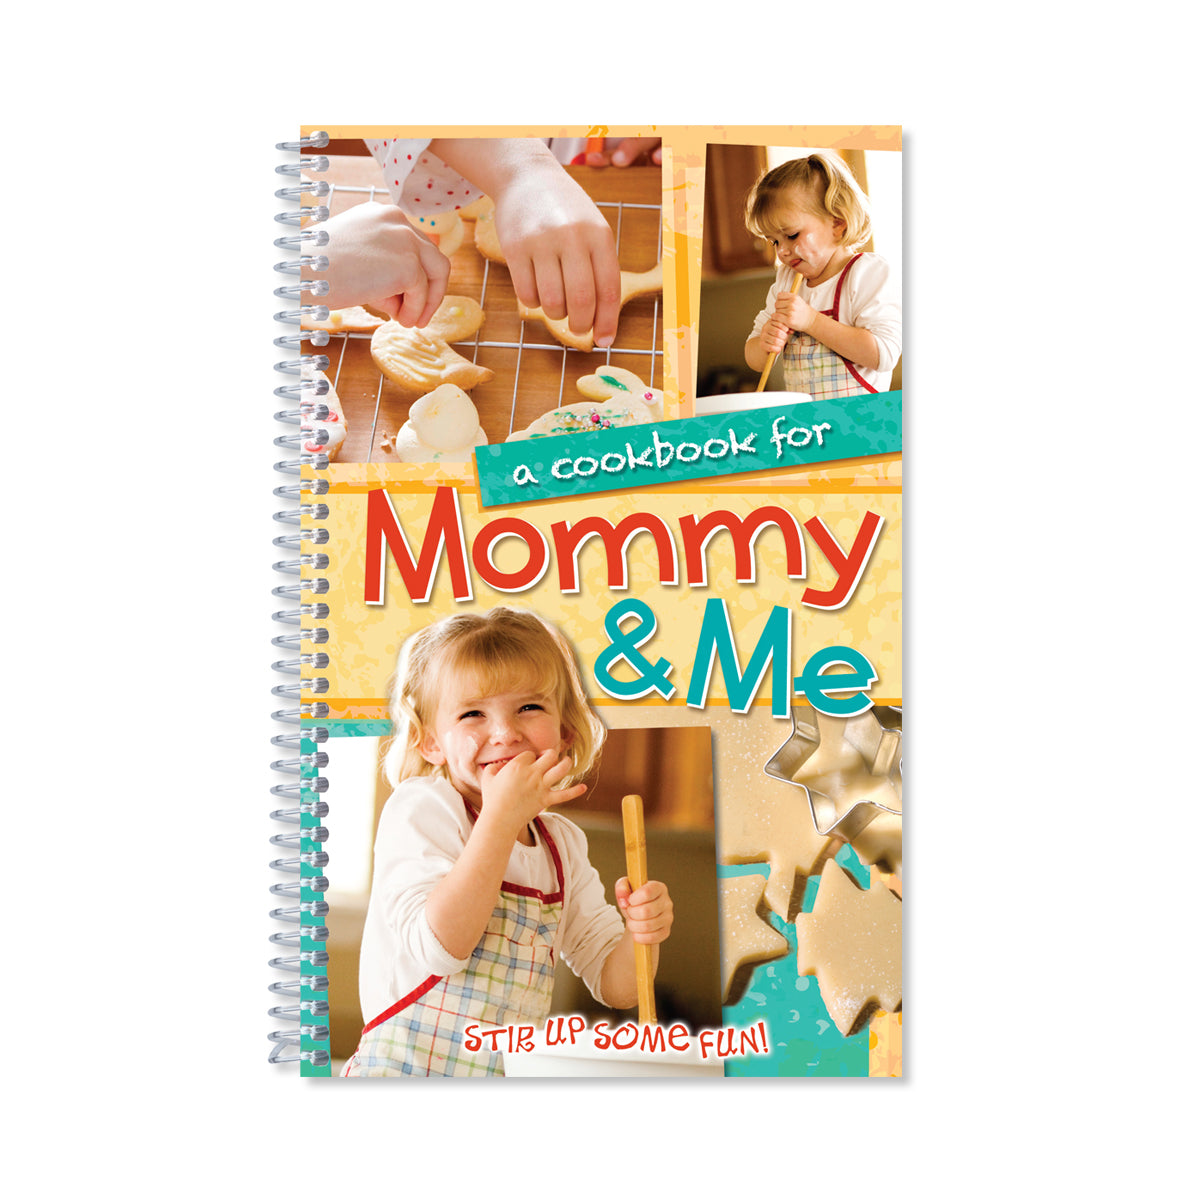 A Cookbook for Mommy & Me